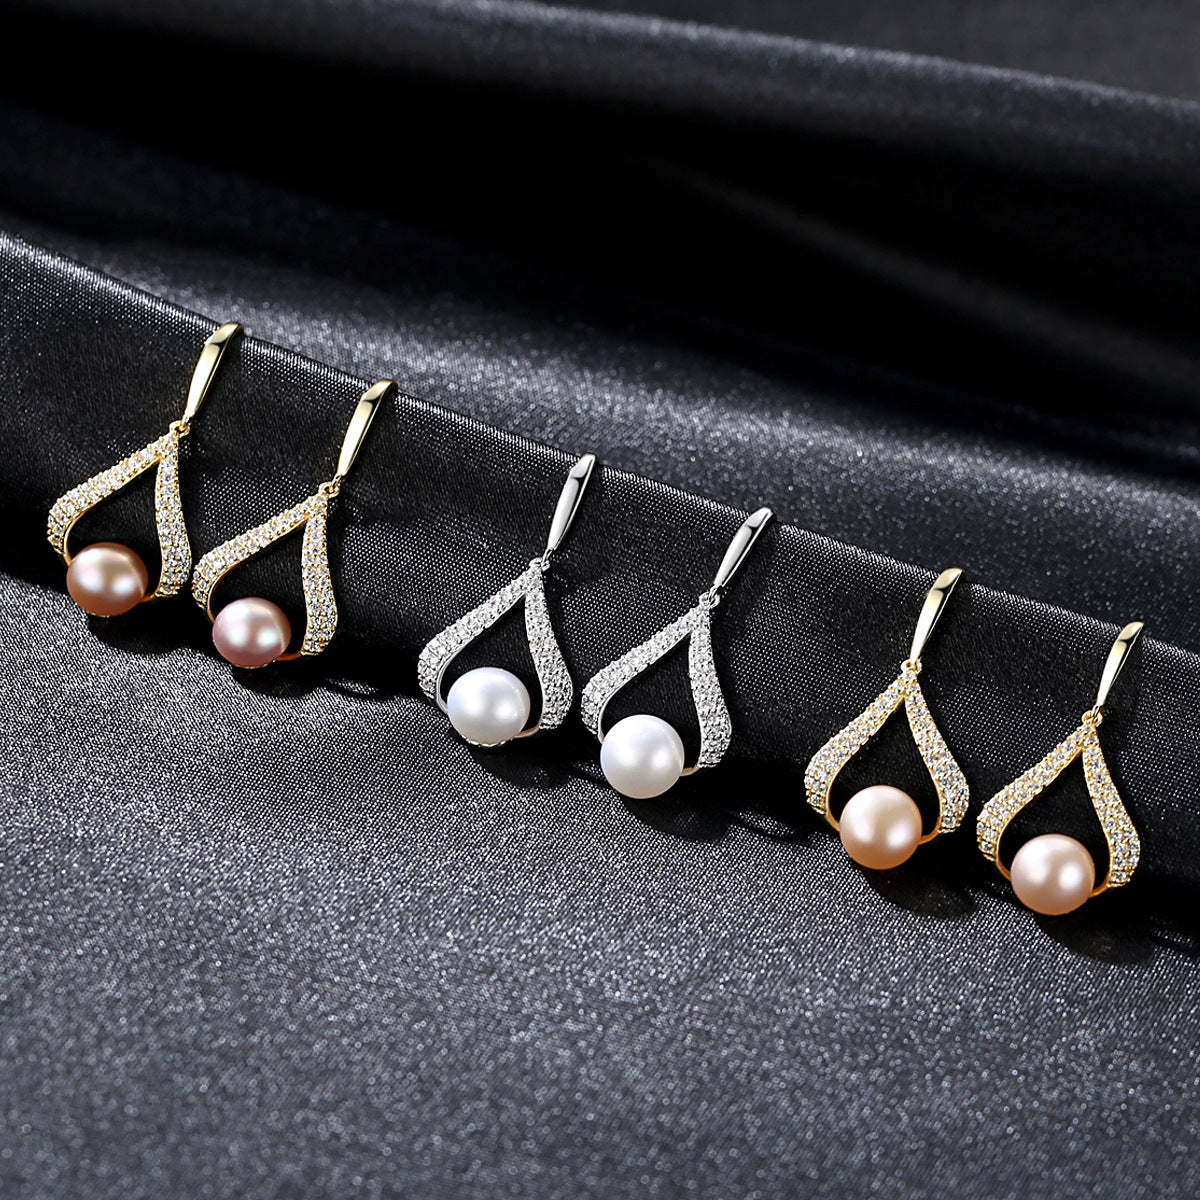 New pearl earrings with water drops